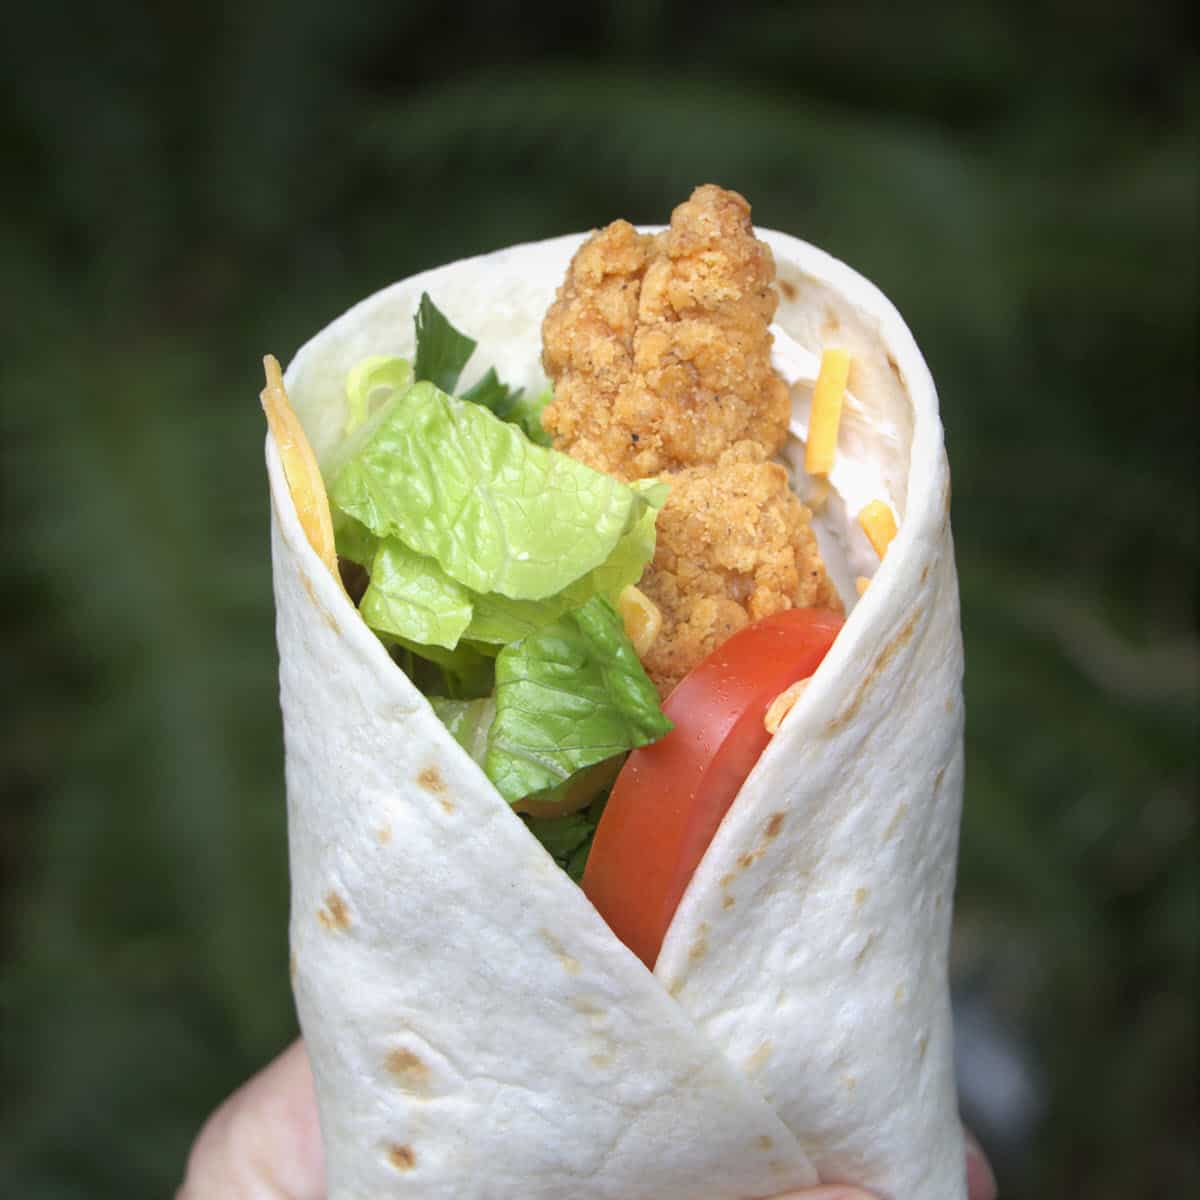 A wrap sliced to reveal chicken nuggets, shredded cheese, red bell pepper and cream cheese rolled up in a wheat tortilla.